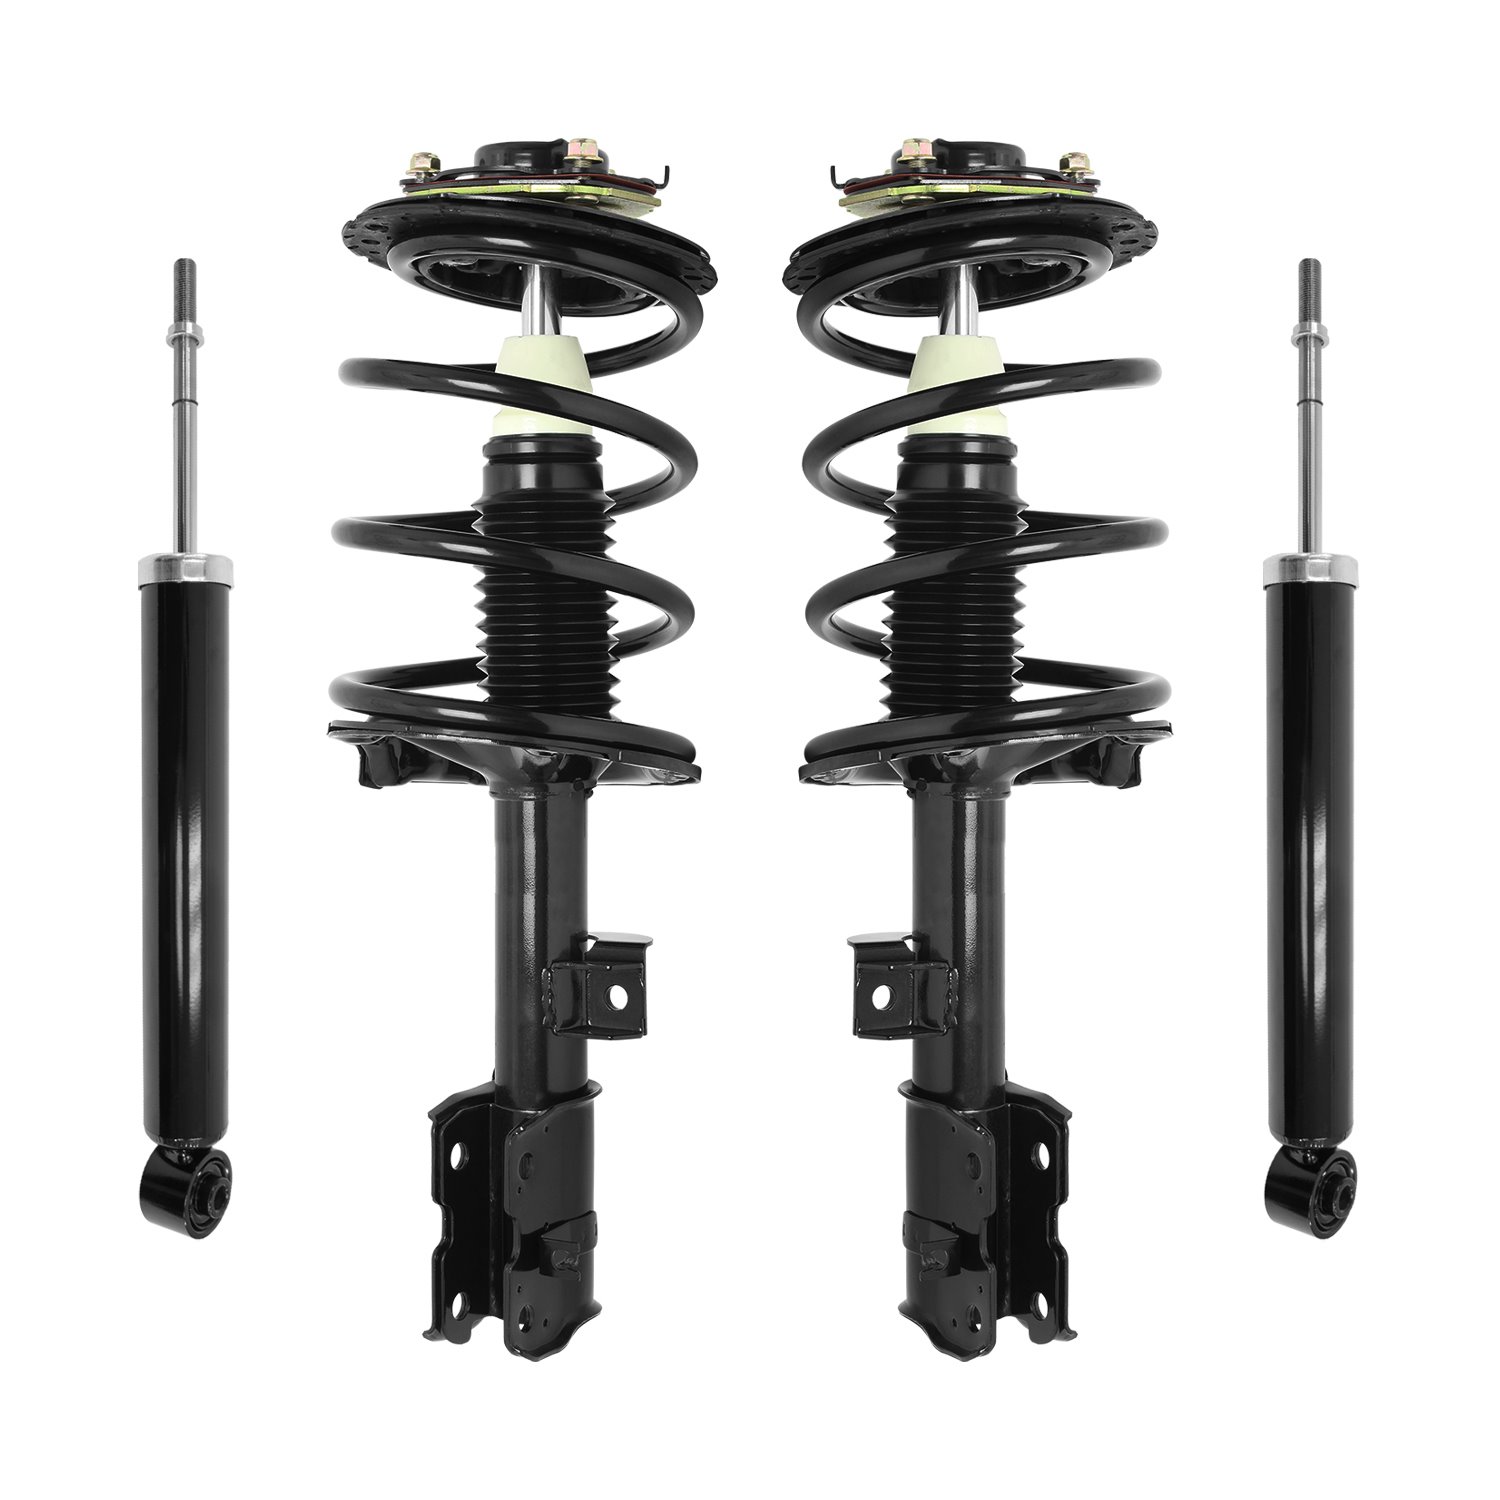 4-11183-255190-001 Front & Rear Suspension Strut & Coil Spring Assembly Fits Select Infiniti FX35, Infiniti FX45